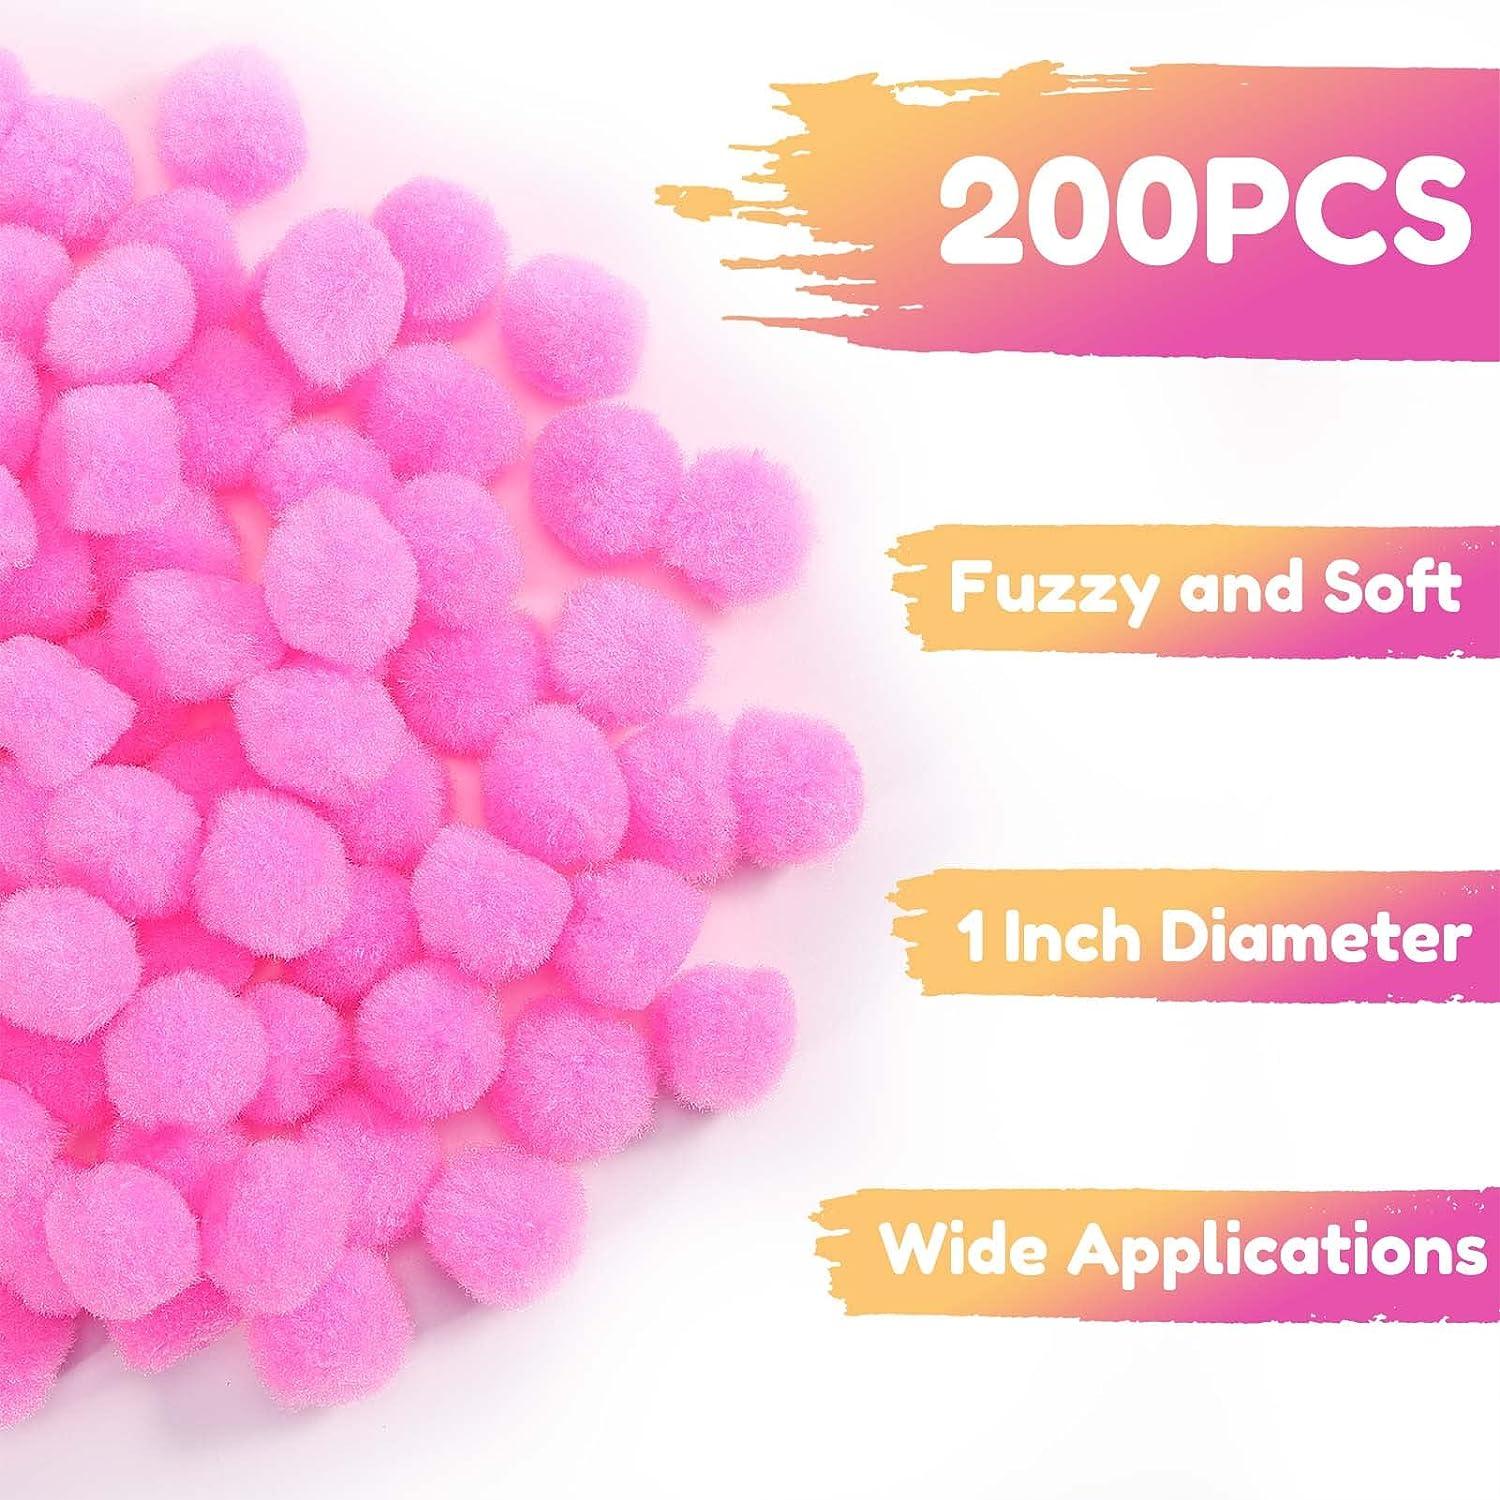  Caydo 500PCS Red Pom Poms, 1cm Small Pom Poms Balls for Kids  DIY Art Creative Crafts Projects and Decorations : Arts, Crafts & Sewing